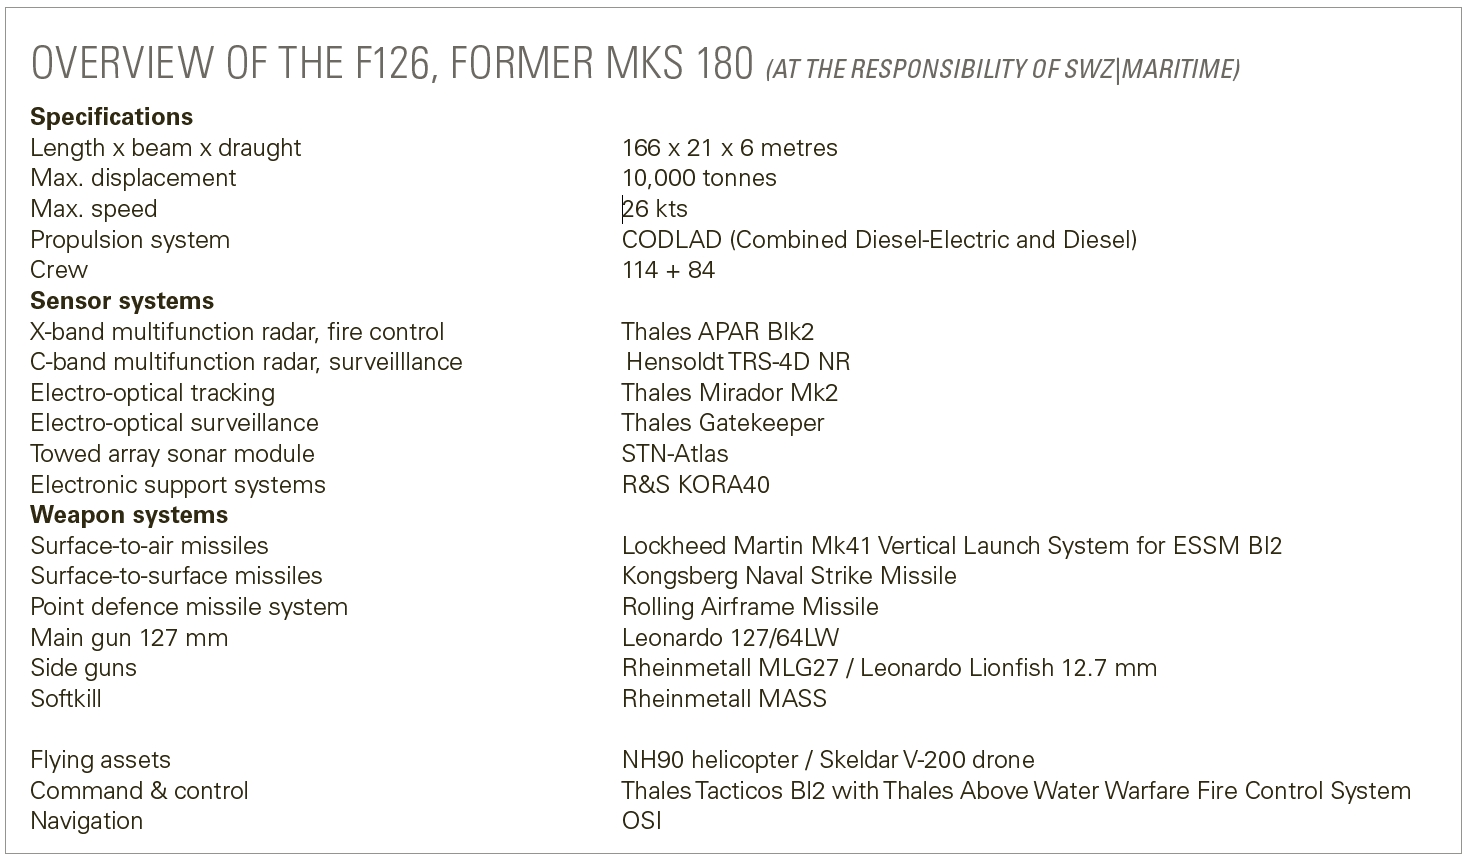 Overview of the F126 frigate for Germany